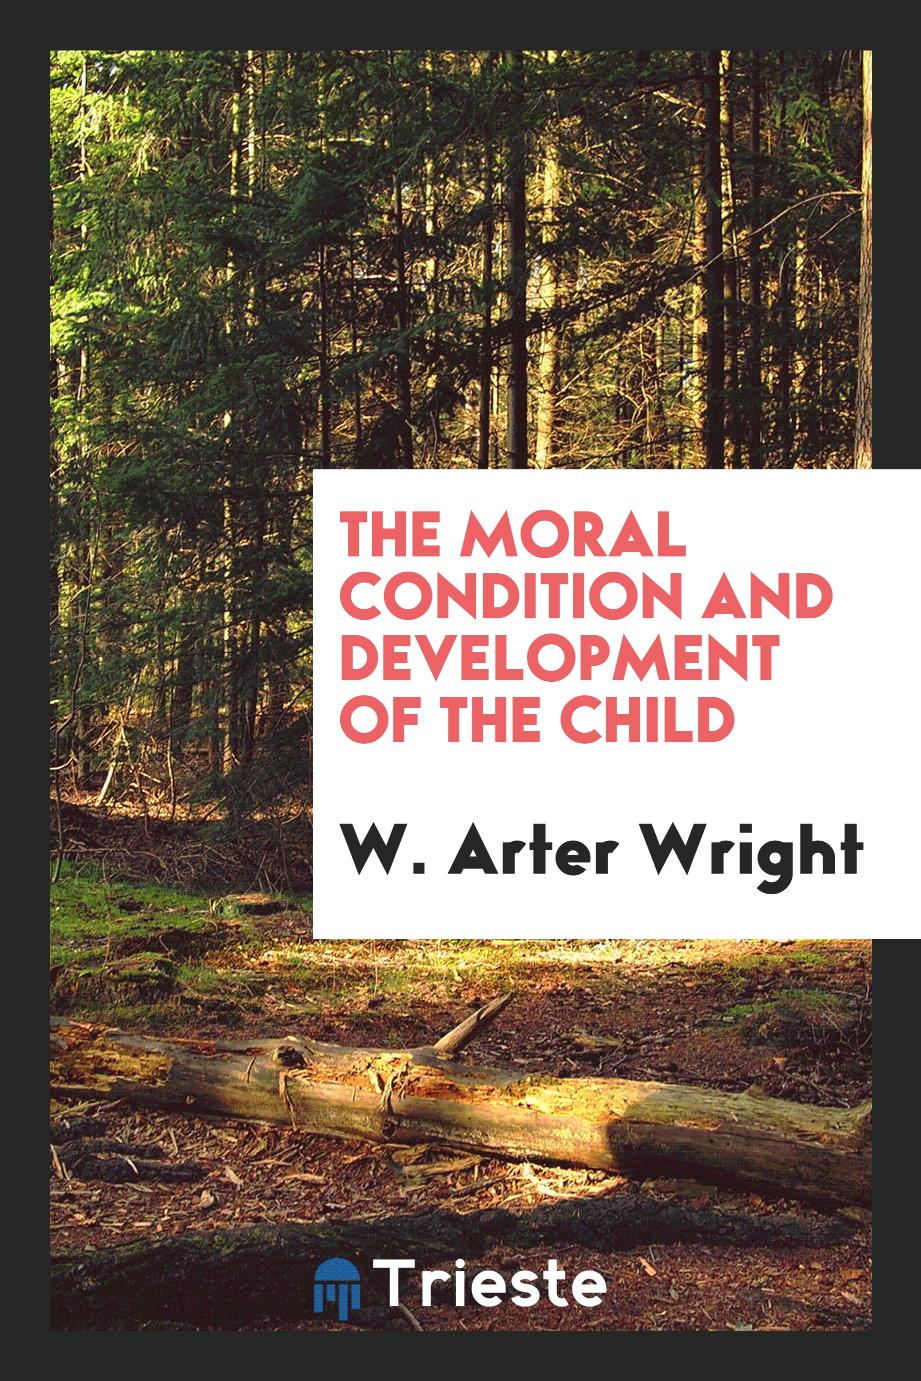 The moral condition and development of the child